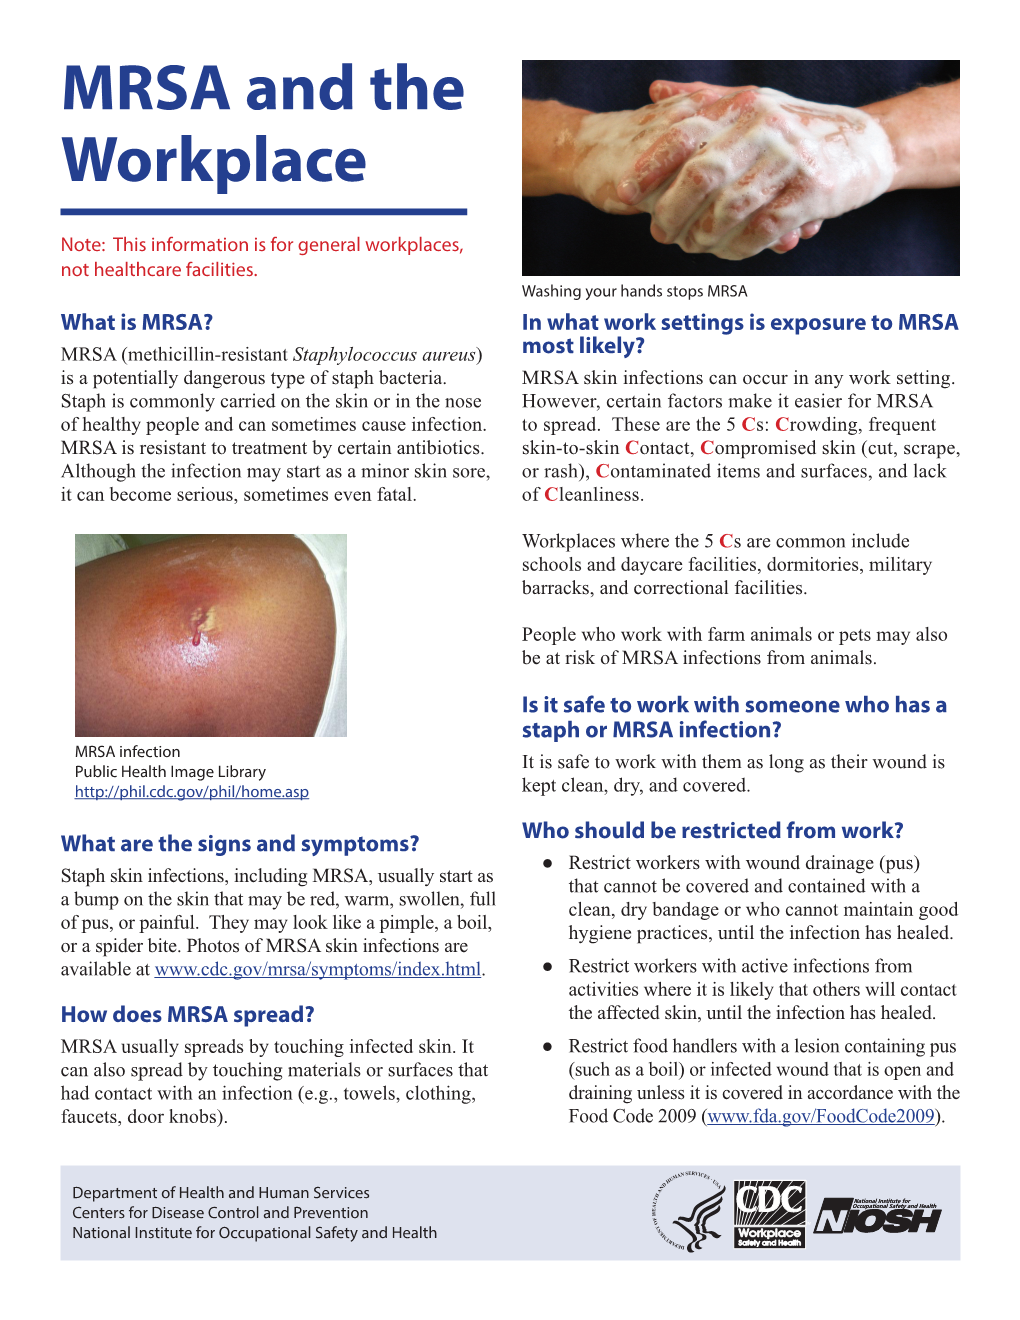 MRSA and the Workplace